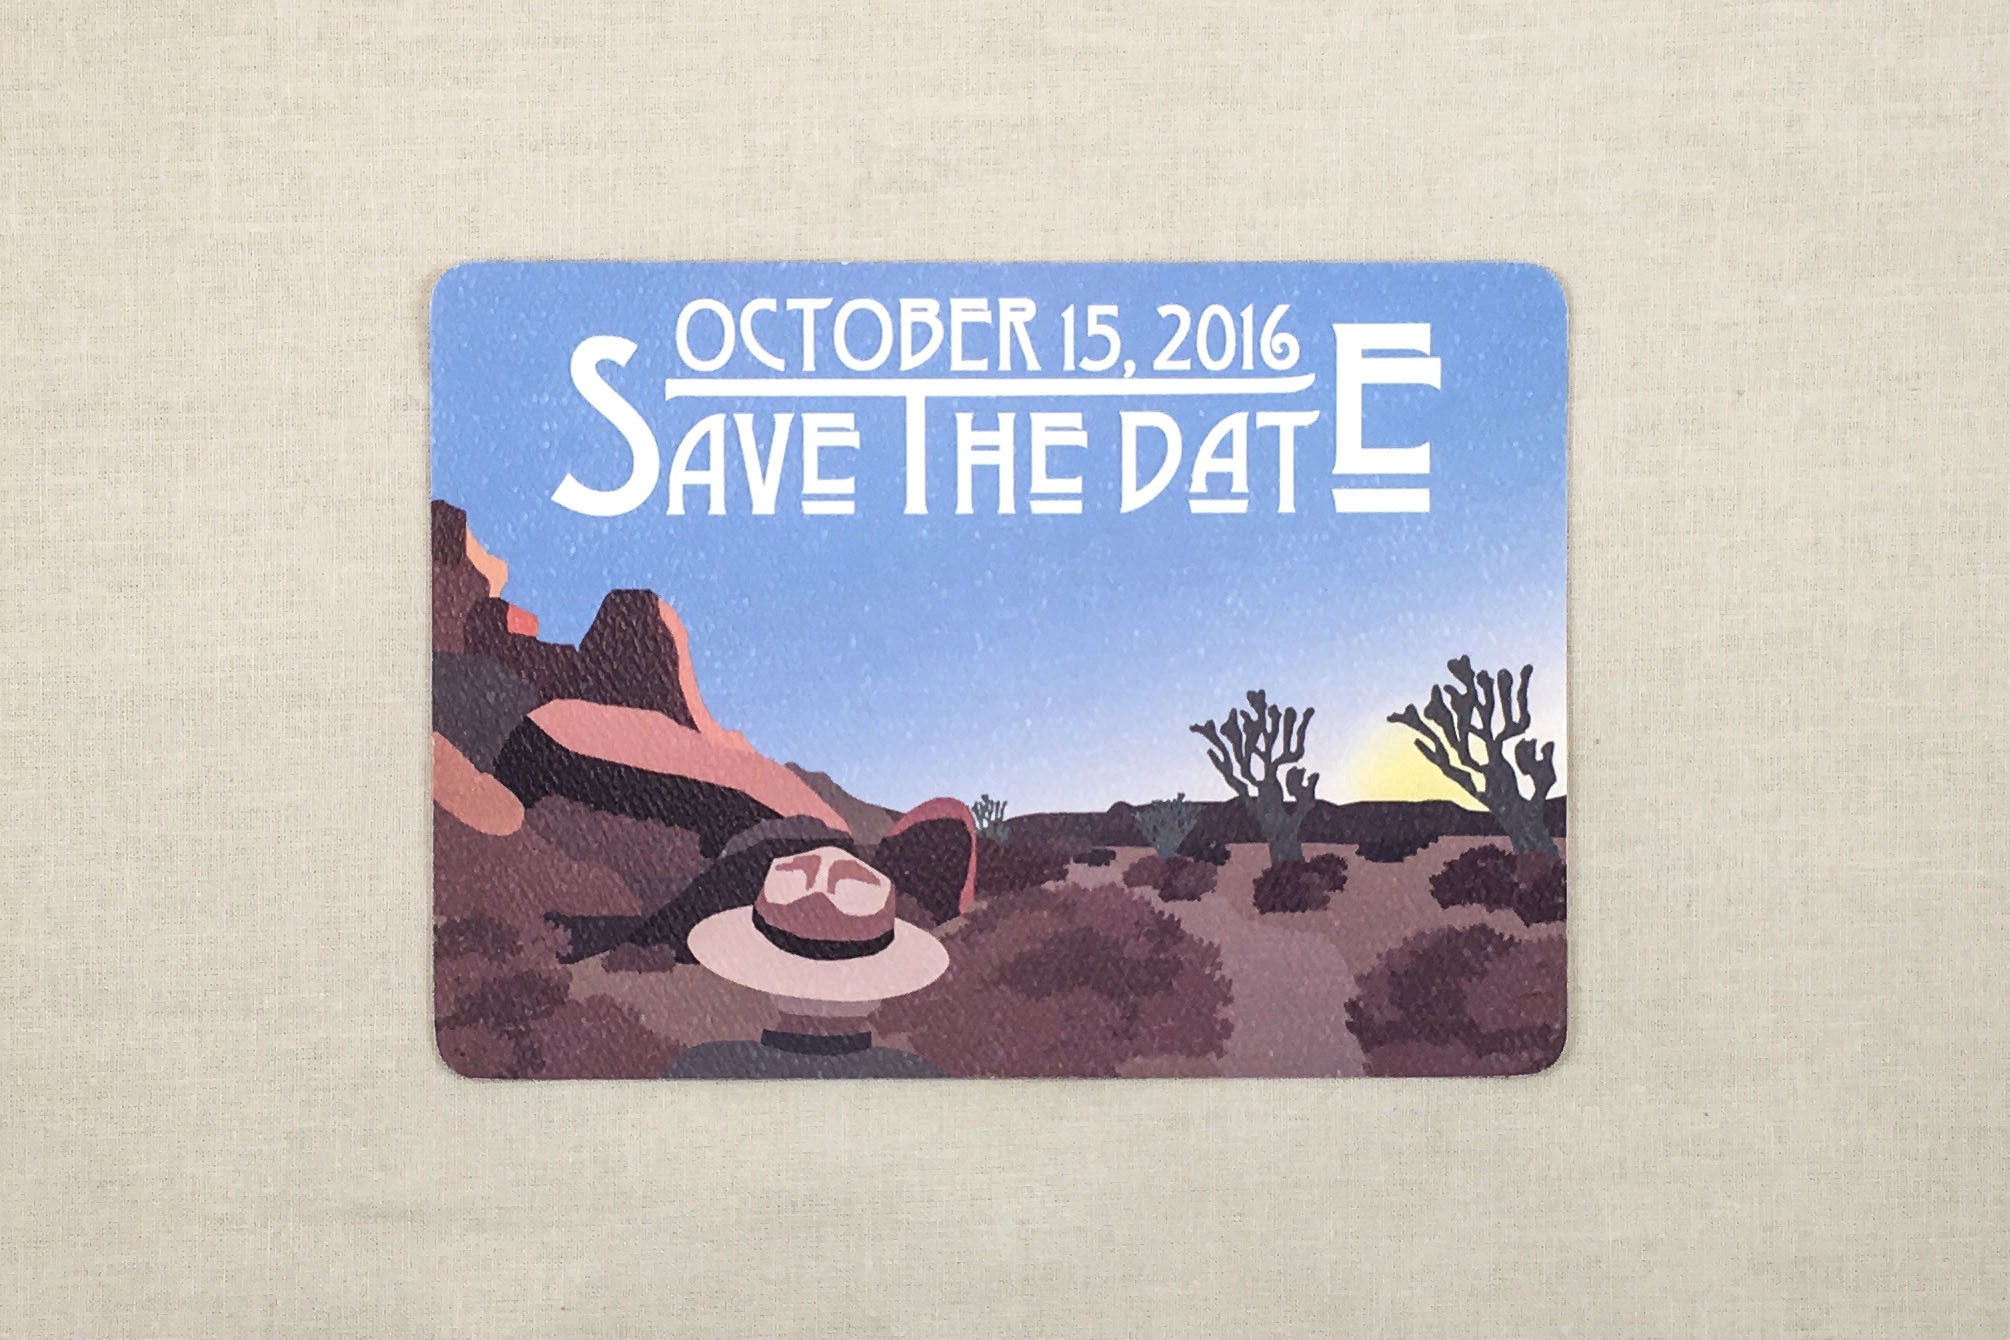 Joshua Tree National Park Save the Date Postcard - Retirement Party Save The Date